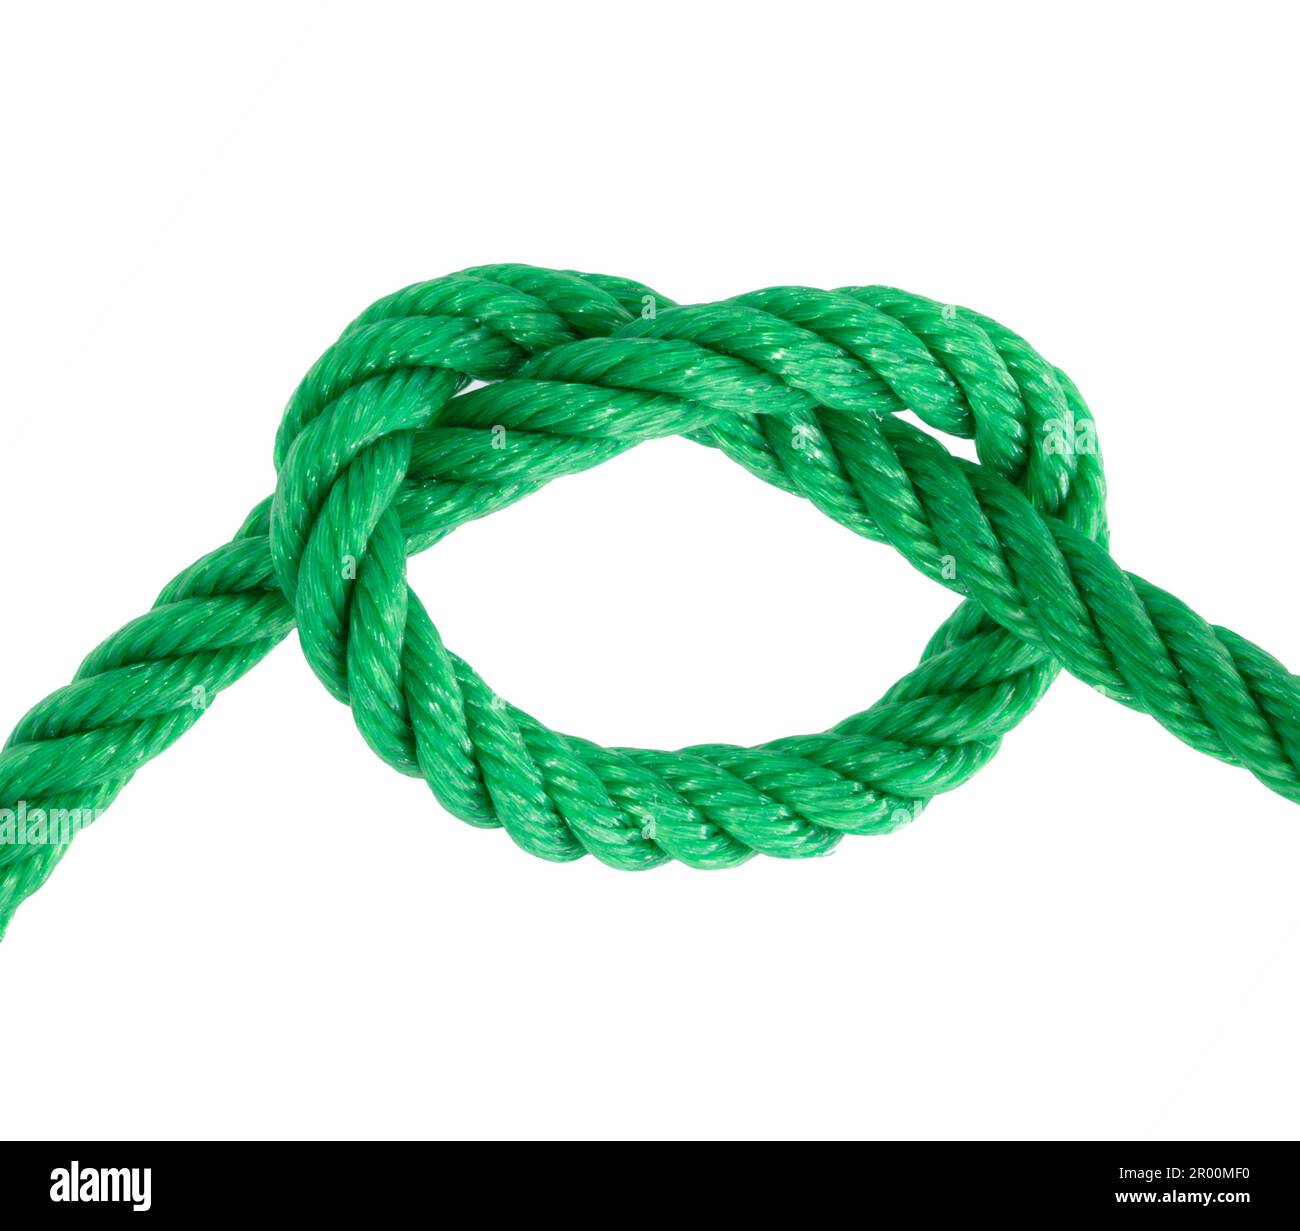 Green twisted rope isolated on white background Stock Photo